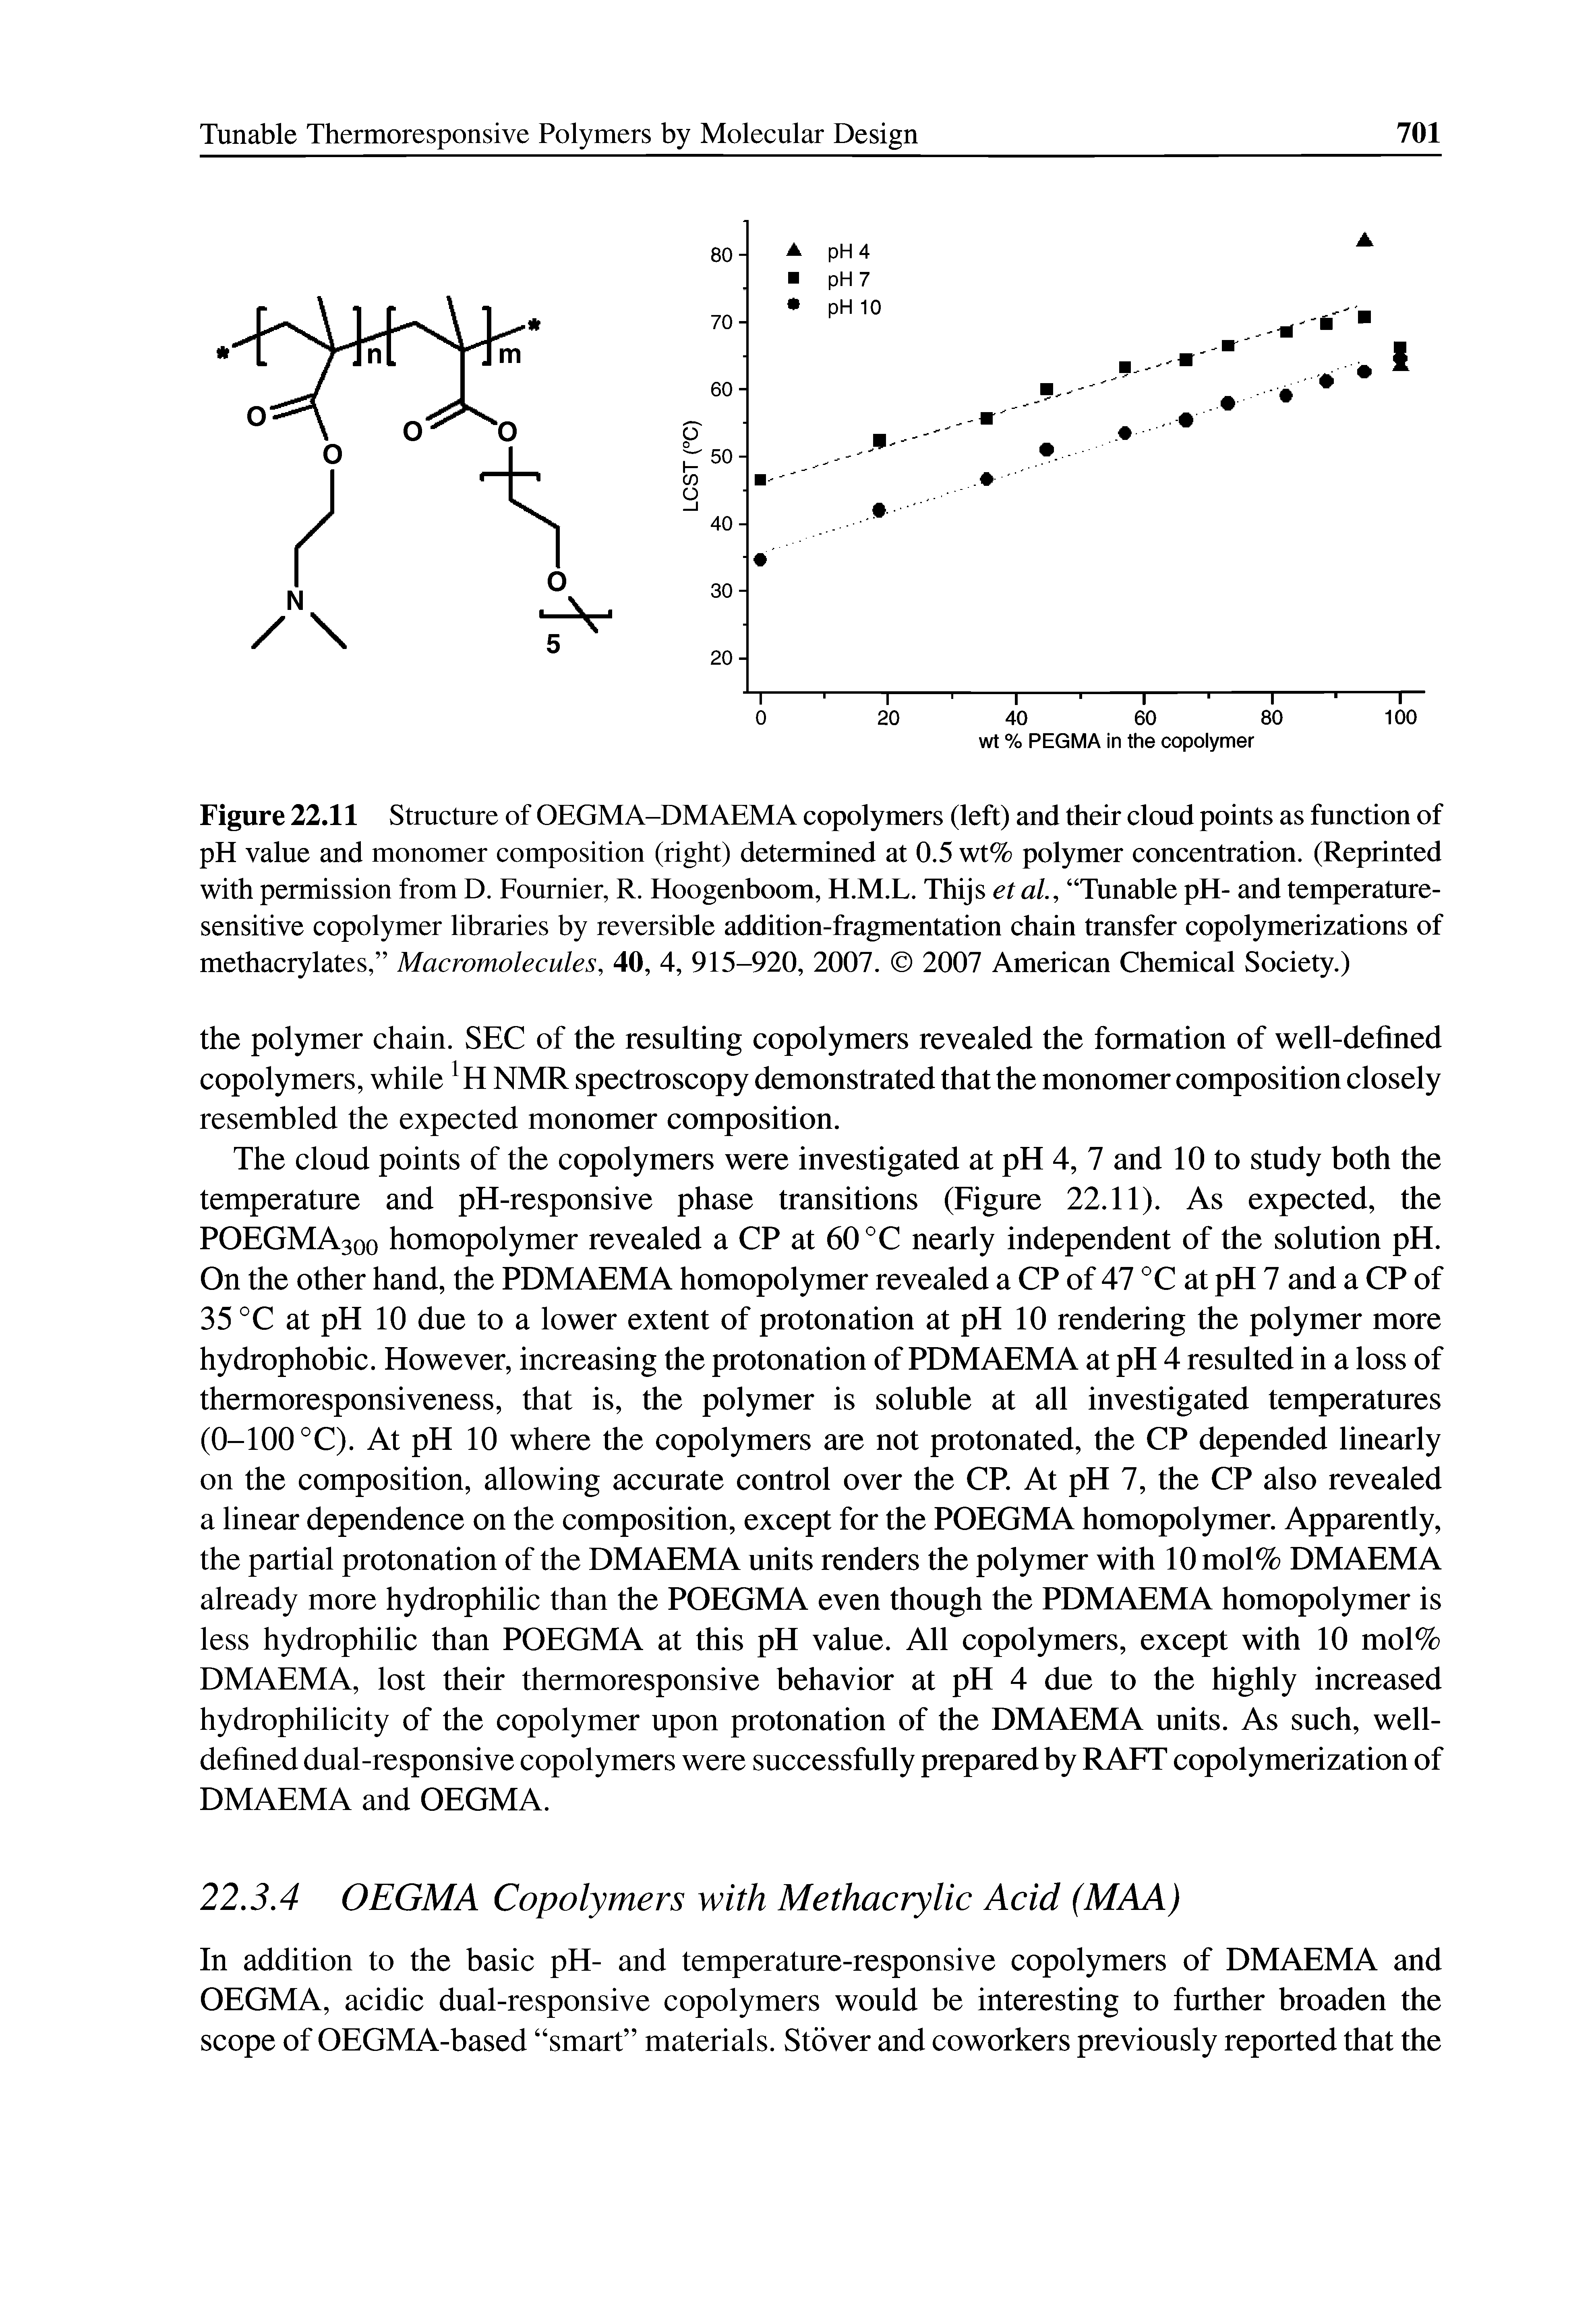 Figure 22.11 Structure of OEGMA-DMAEMA copolymers (left) and their cloud points as function of pH value and monomer composition (right) determined at 0.5 wt% polymer concentration. (Reprinted with permission from D. Fournier, R. Hoogenboom, H.M.L. Thijs et al., Tunable pH- and temperature-sensitive copolymer libraries by reversible addition-fragmentation chain transfer copolymerizations of methacrylates, Macromolecules, 40, 4, 915-920, 2007. 2007 American Chemical Society.)...